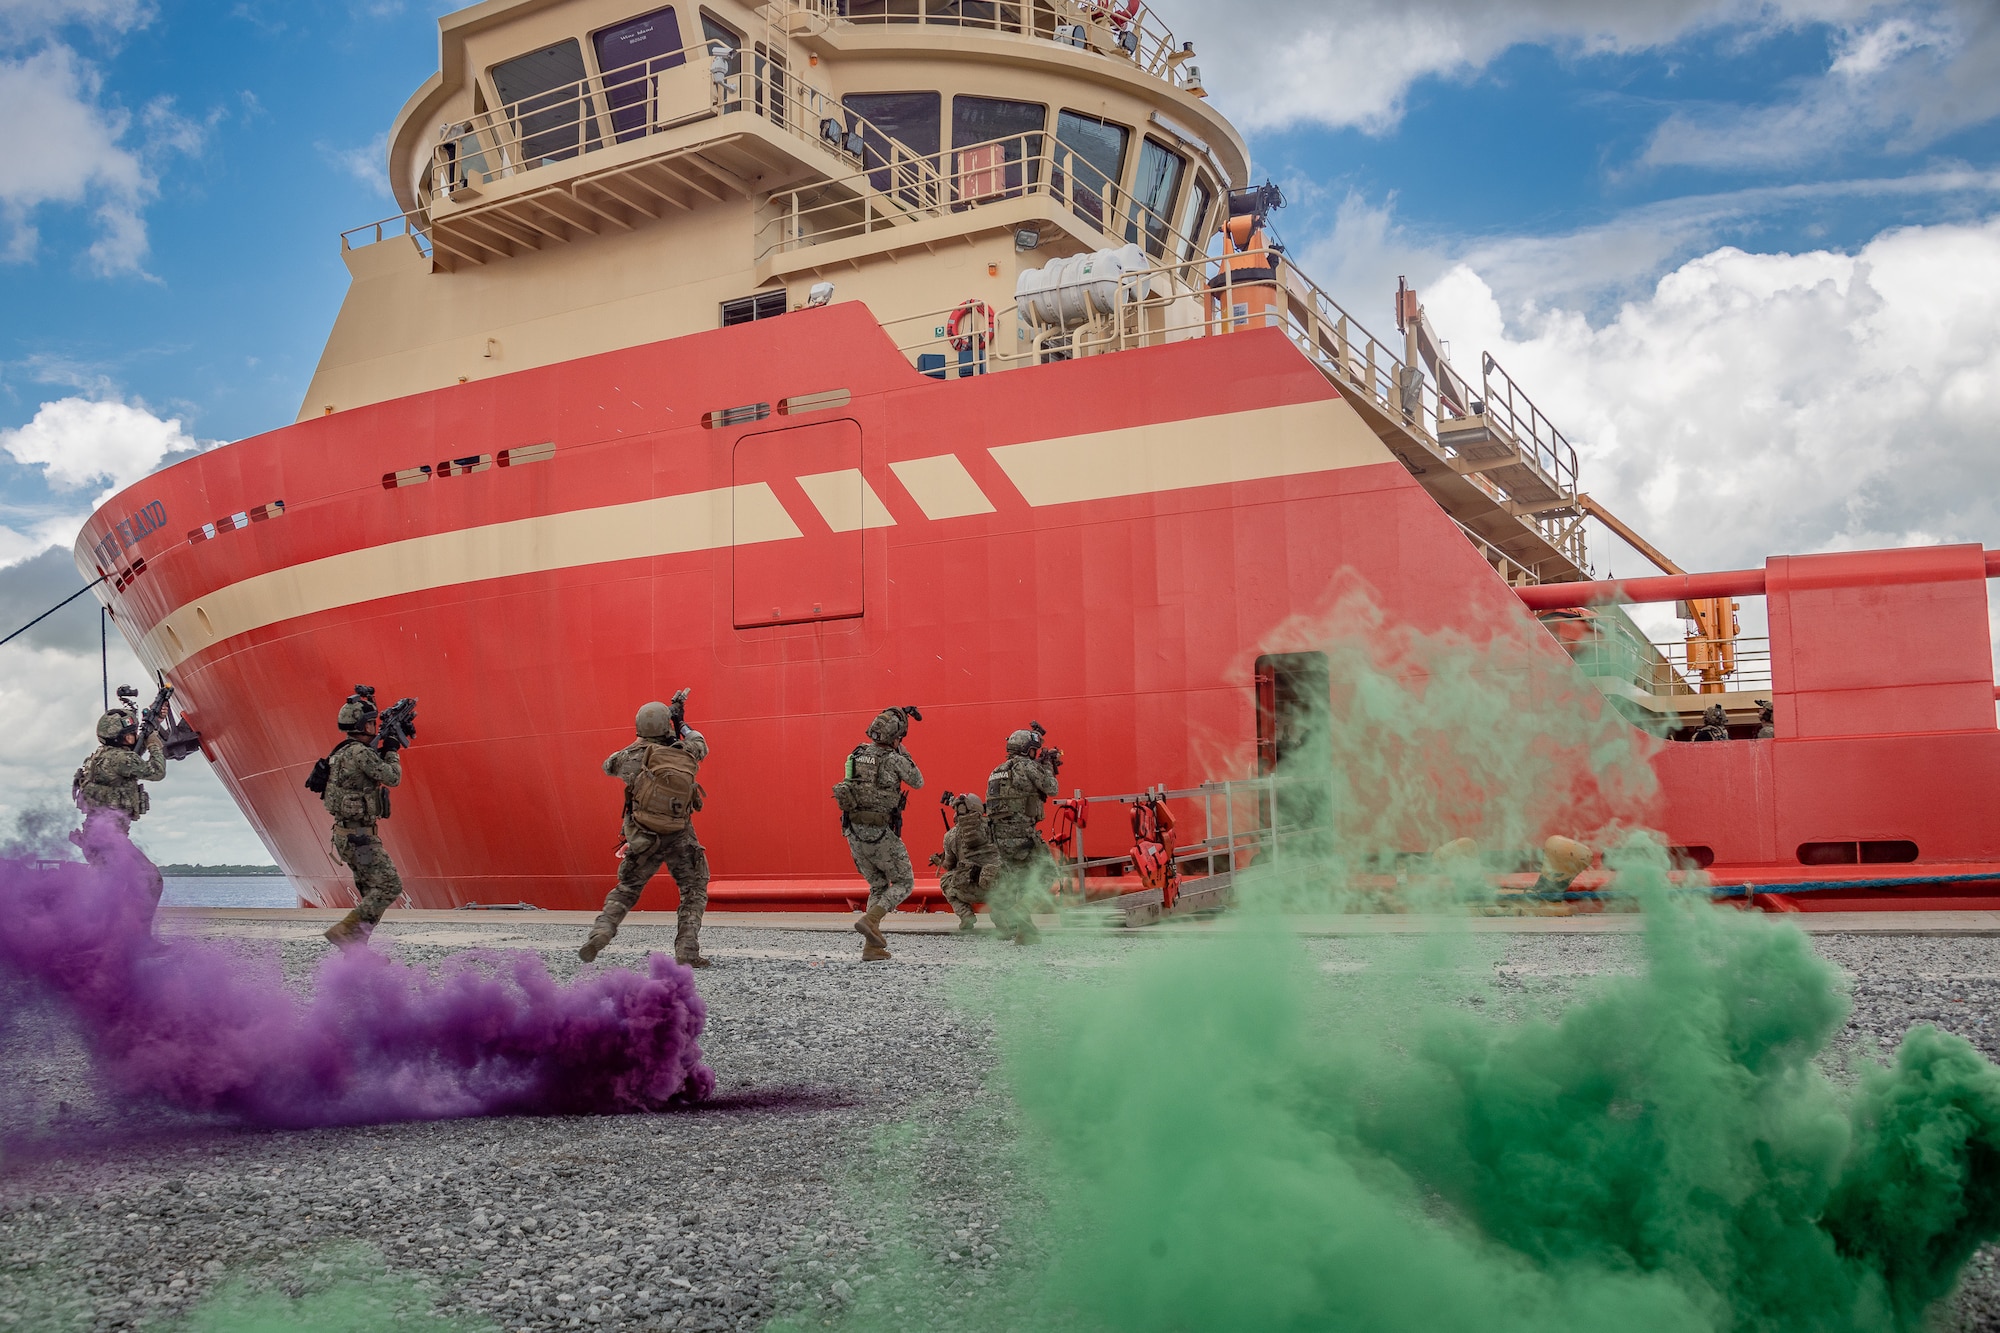 Multinational troops from Guyana, Mexico, Trinidad and Tobago and the U.S. board a vessel moored at a shore base facility for an anti-piracy exercise during Tradewinds 23 exercise in Georgetown, Guyana, July 24, 2023. This training exercise incorporated volunteers as opposition forces for the four nations to experience operating with real people in a high-stress environment. (U.S. Air National Guard photo by Tech. Sgt. Brigette Waltermire)